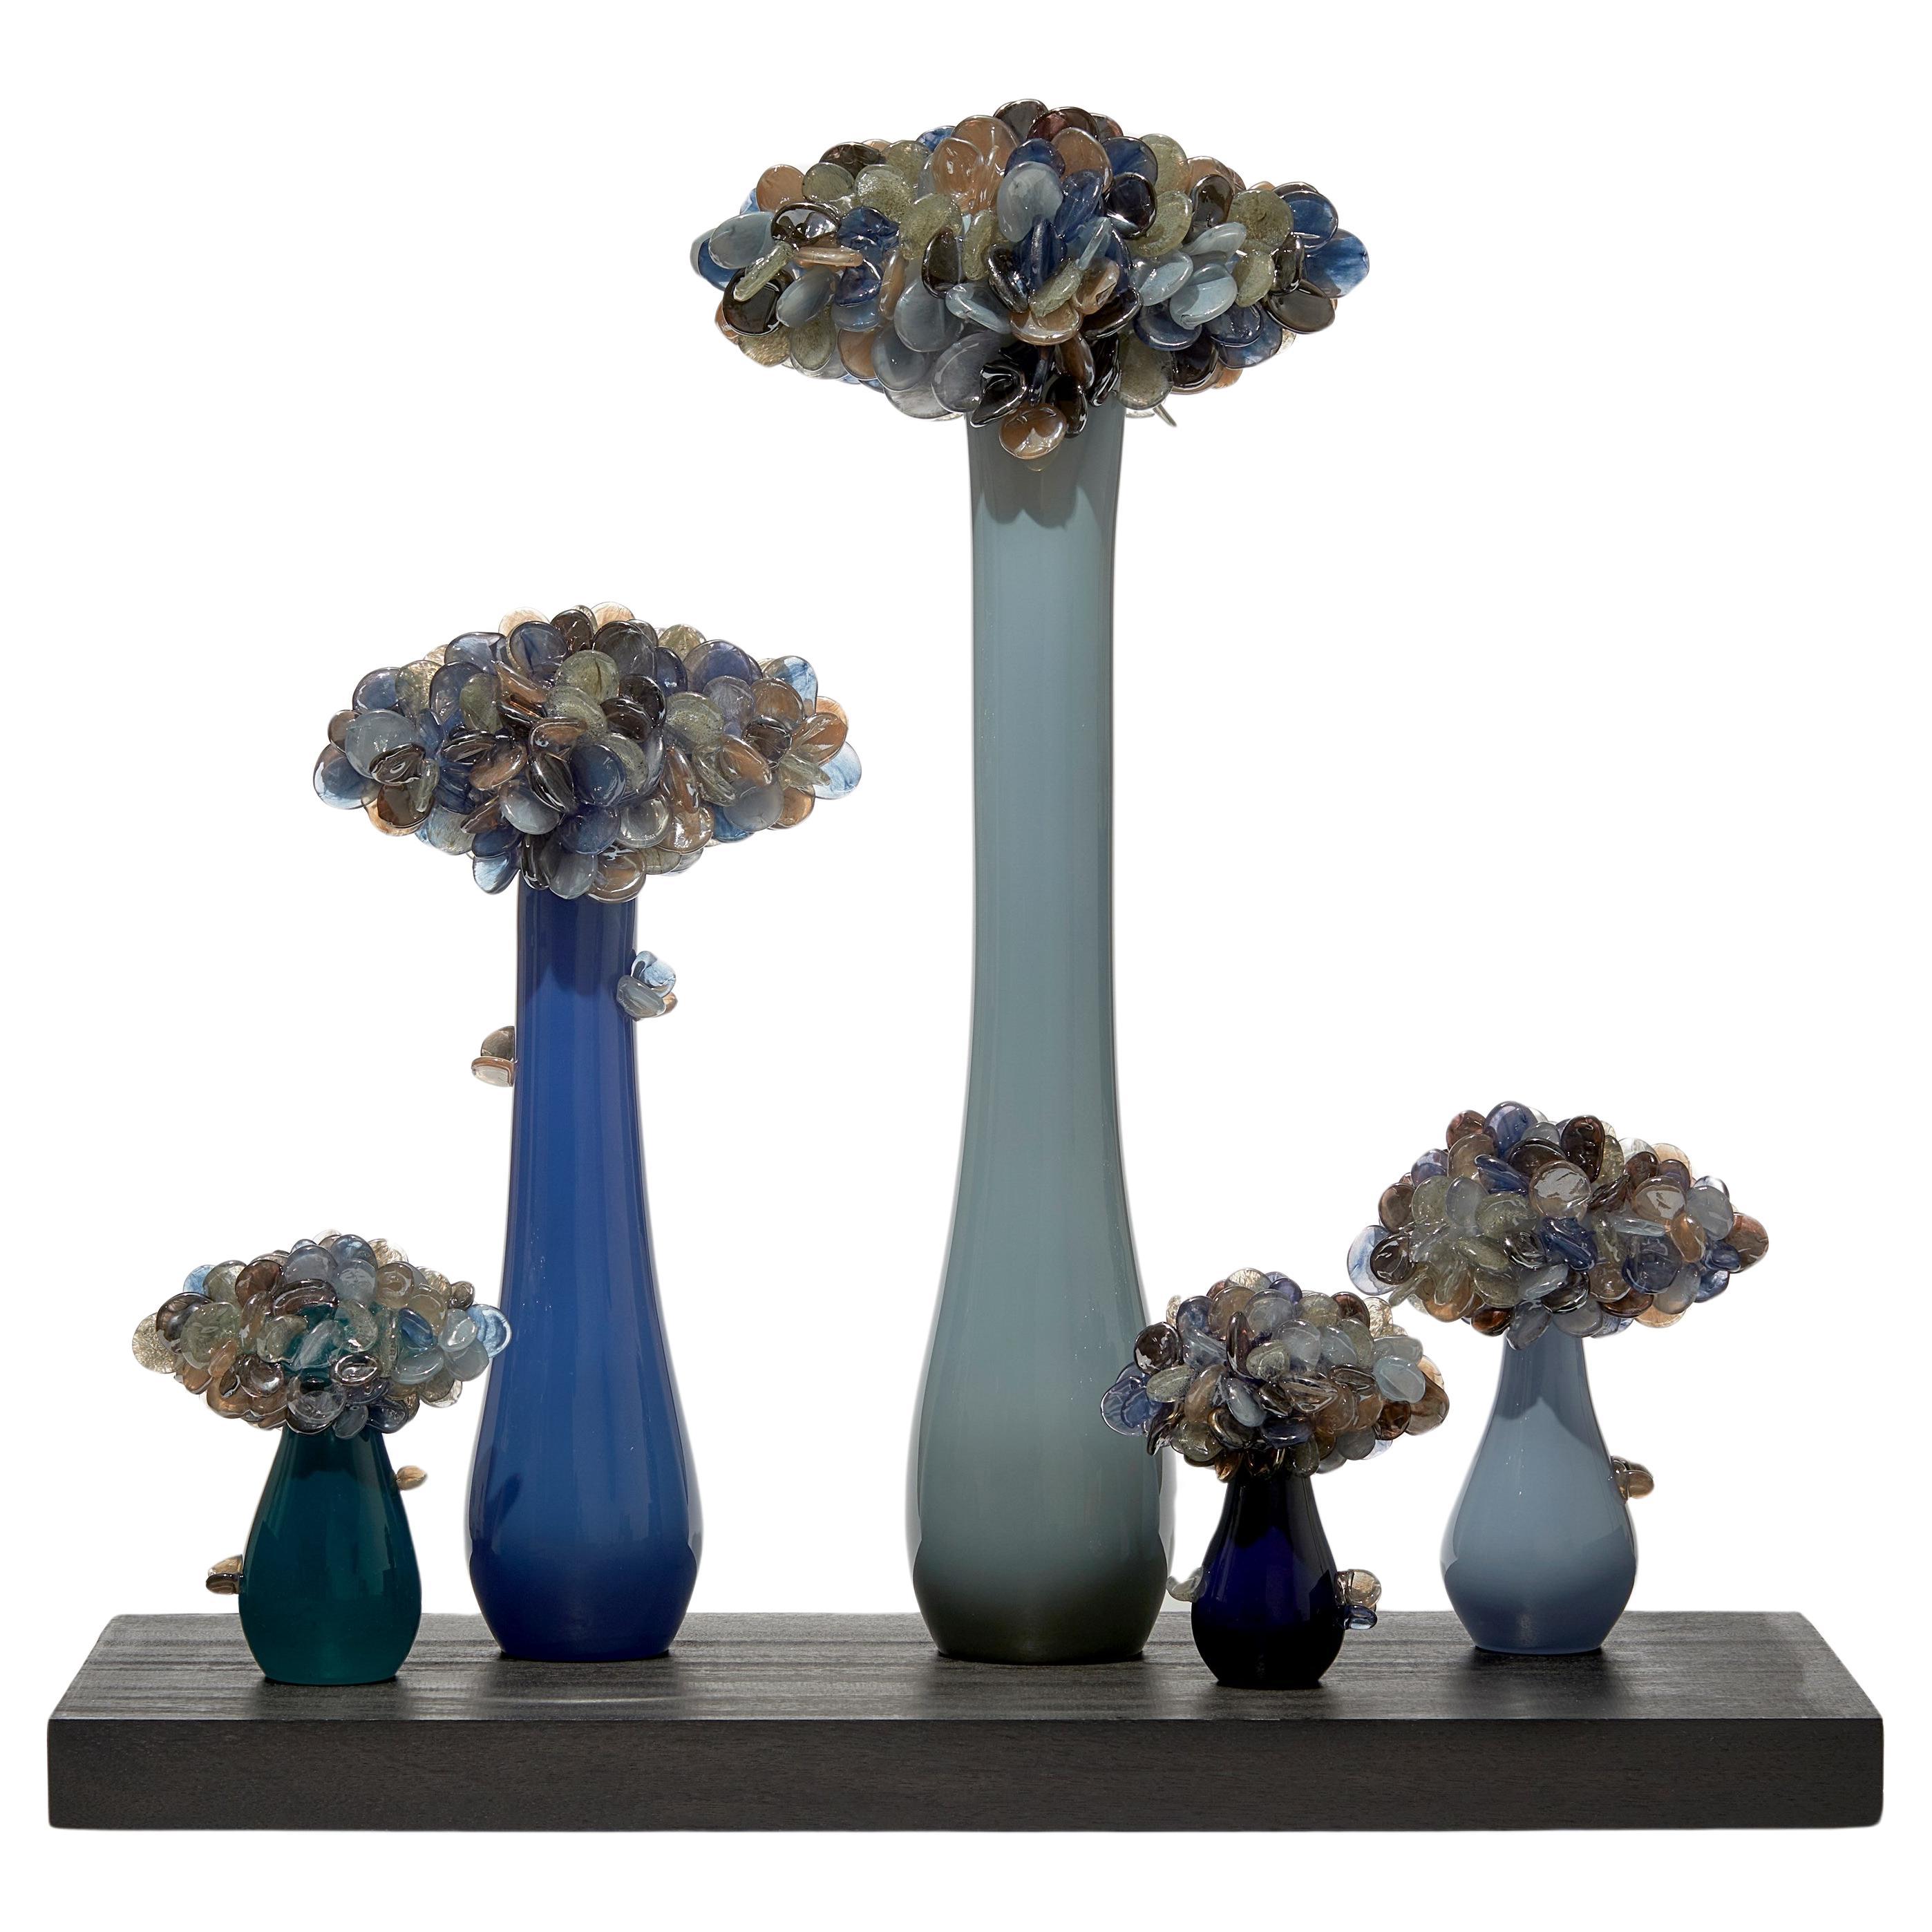 Enchanted Mori Dusk, a tree & bonsai inspired glass artwork by Louis Thompson For Sale